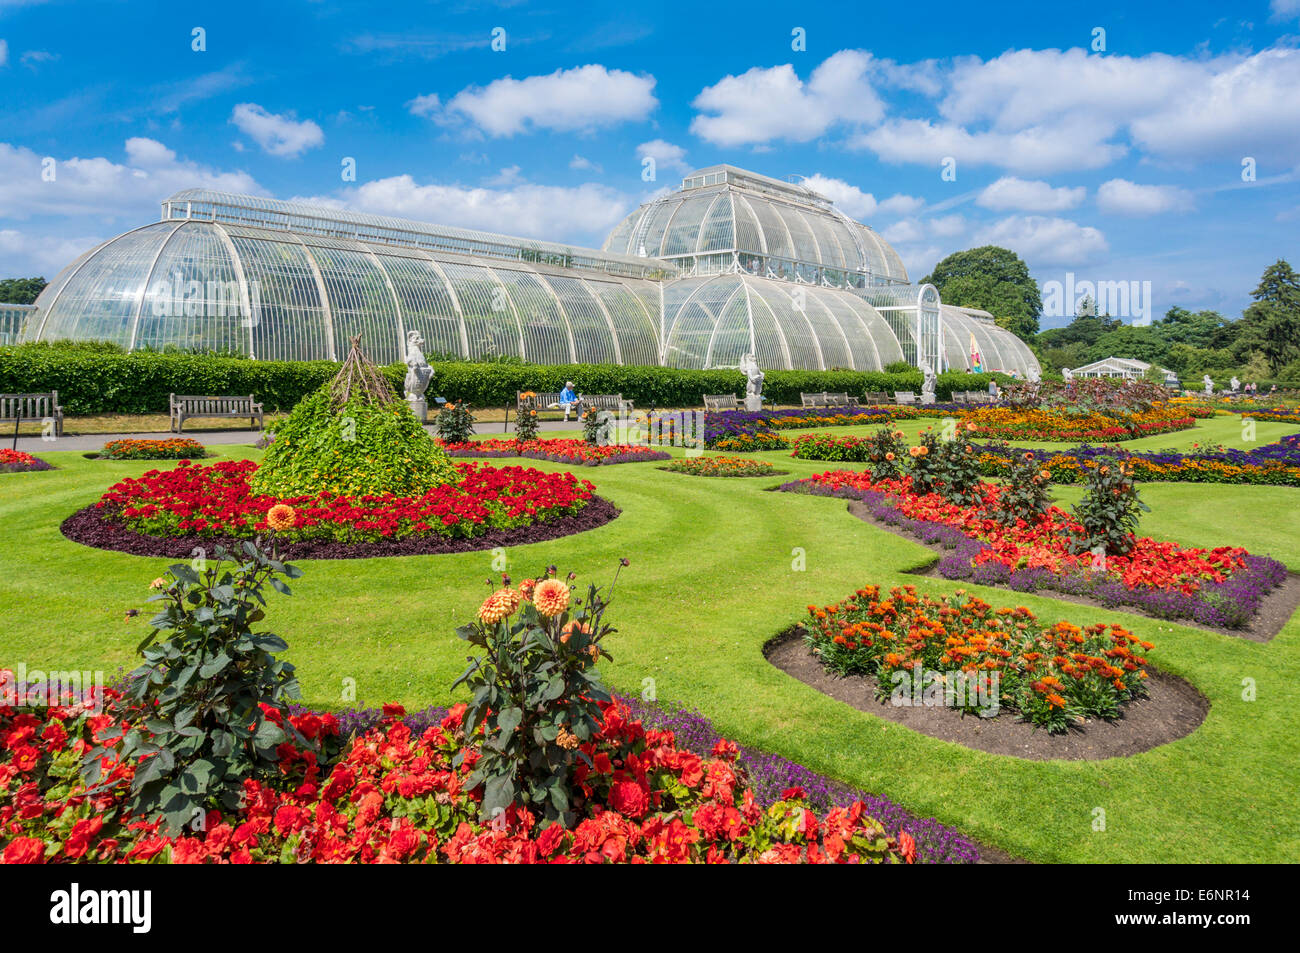 Kew Gardens The Palm House built by architect Decimus Burton and Parterre in Kew Gardens London England UK GB Europe Stock Photo